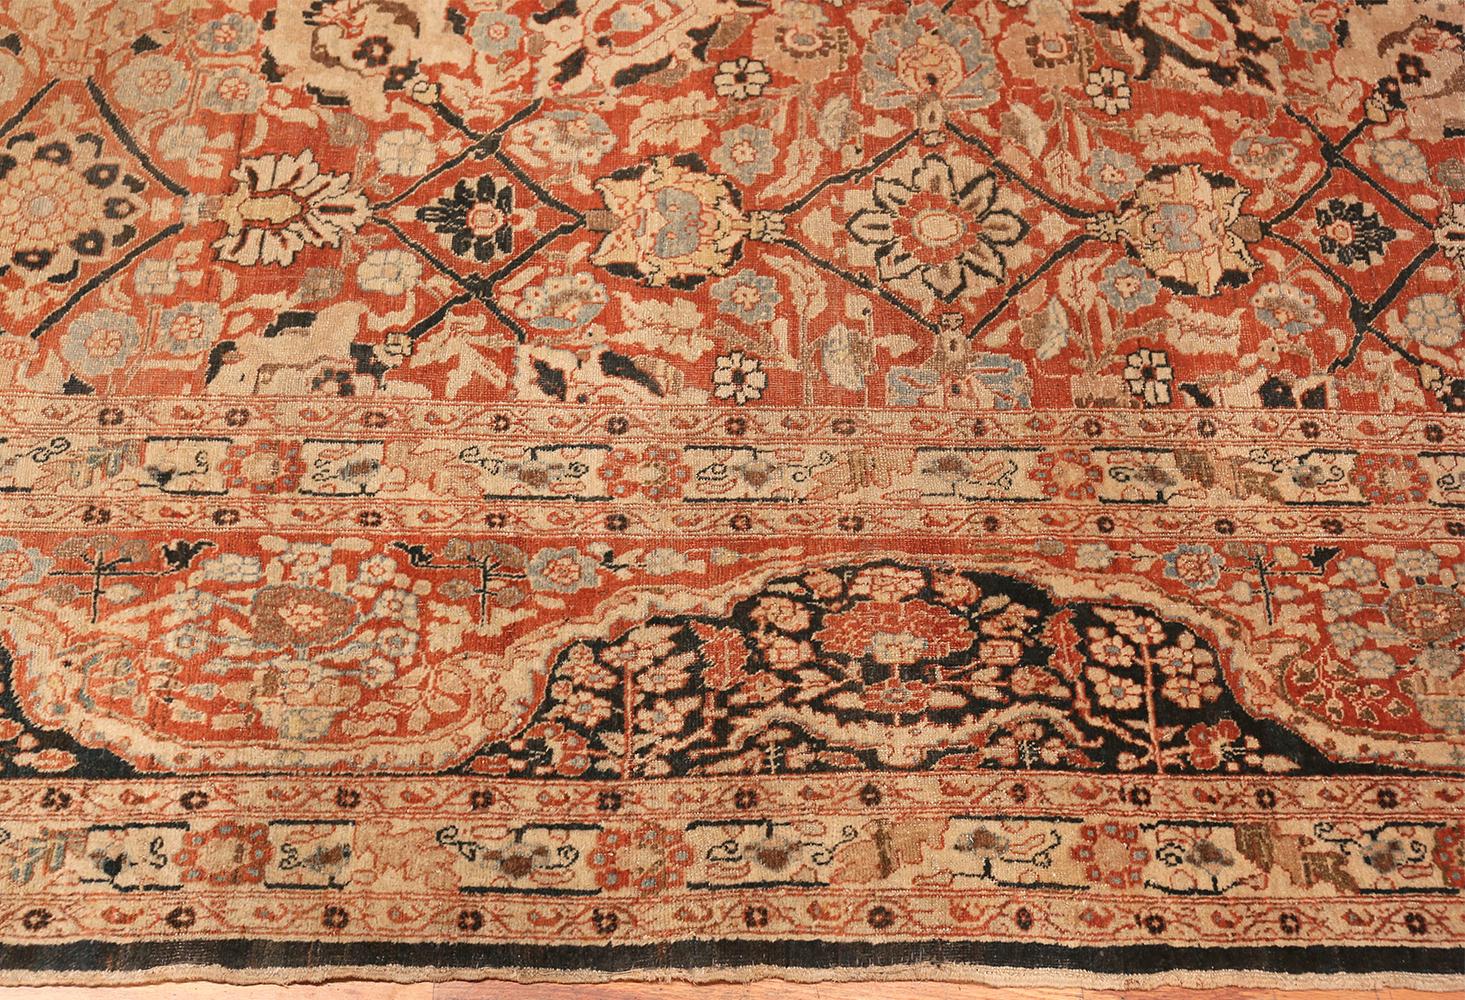 Breathtaking floral antique Persian Tabriz rug, country of origin / rug type: Persian rugs, date circa 1900. Size: 9 ft. 3 in x 13 ft. 2 in (2.82 m x 4.01 m).